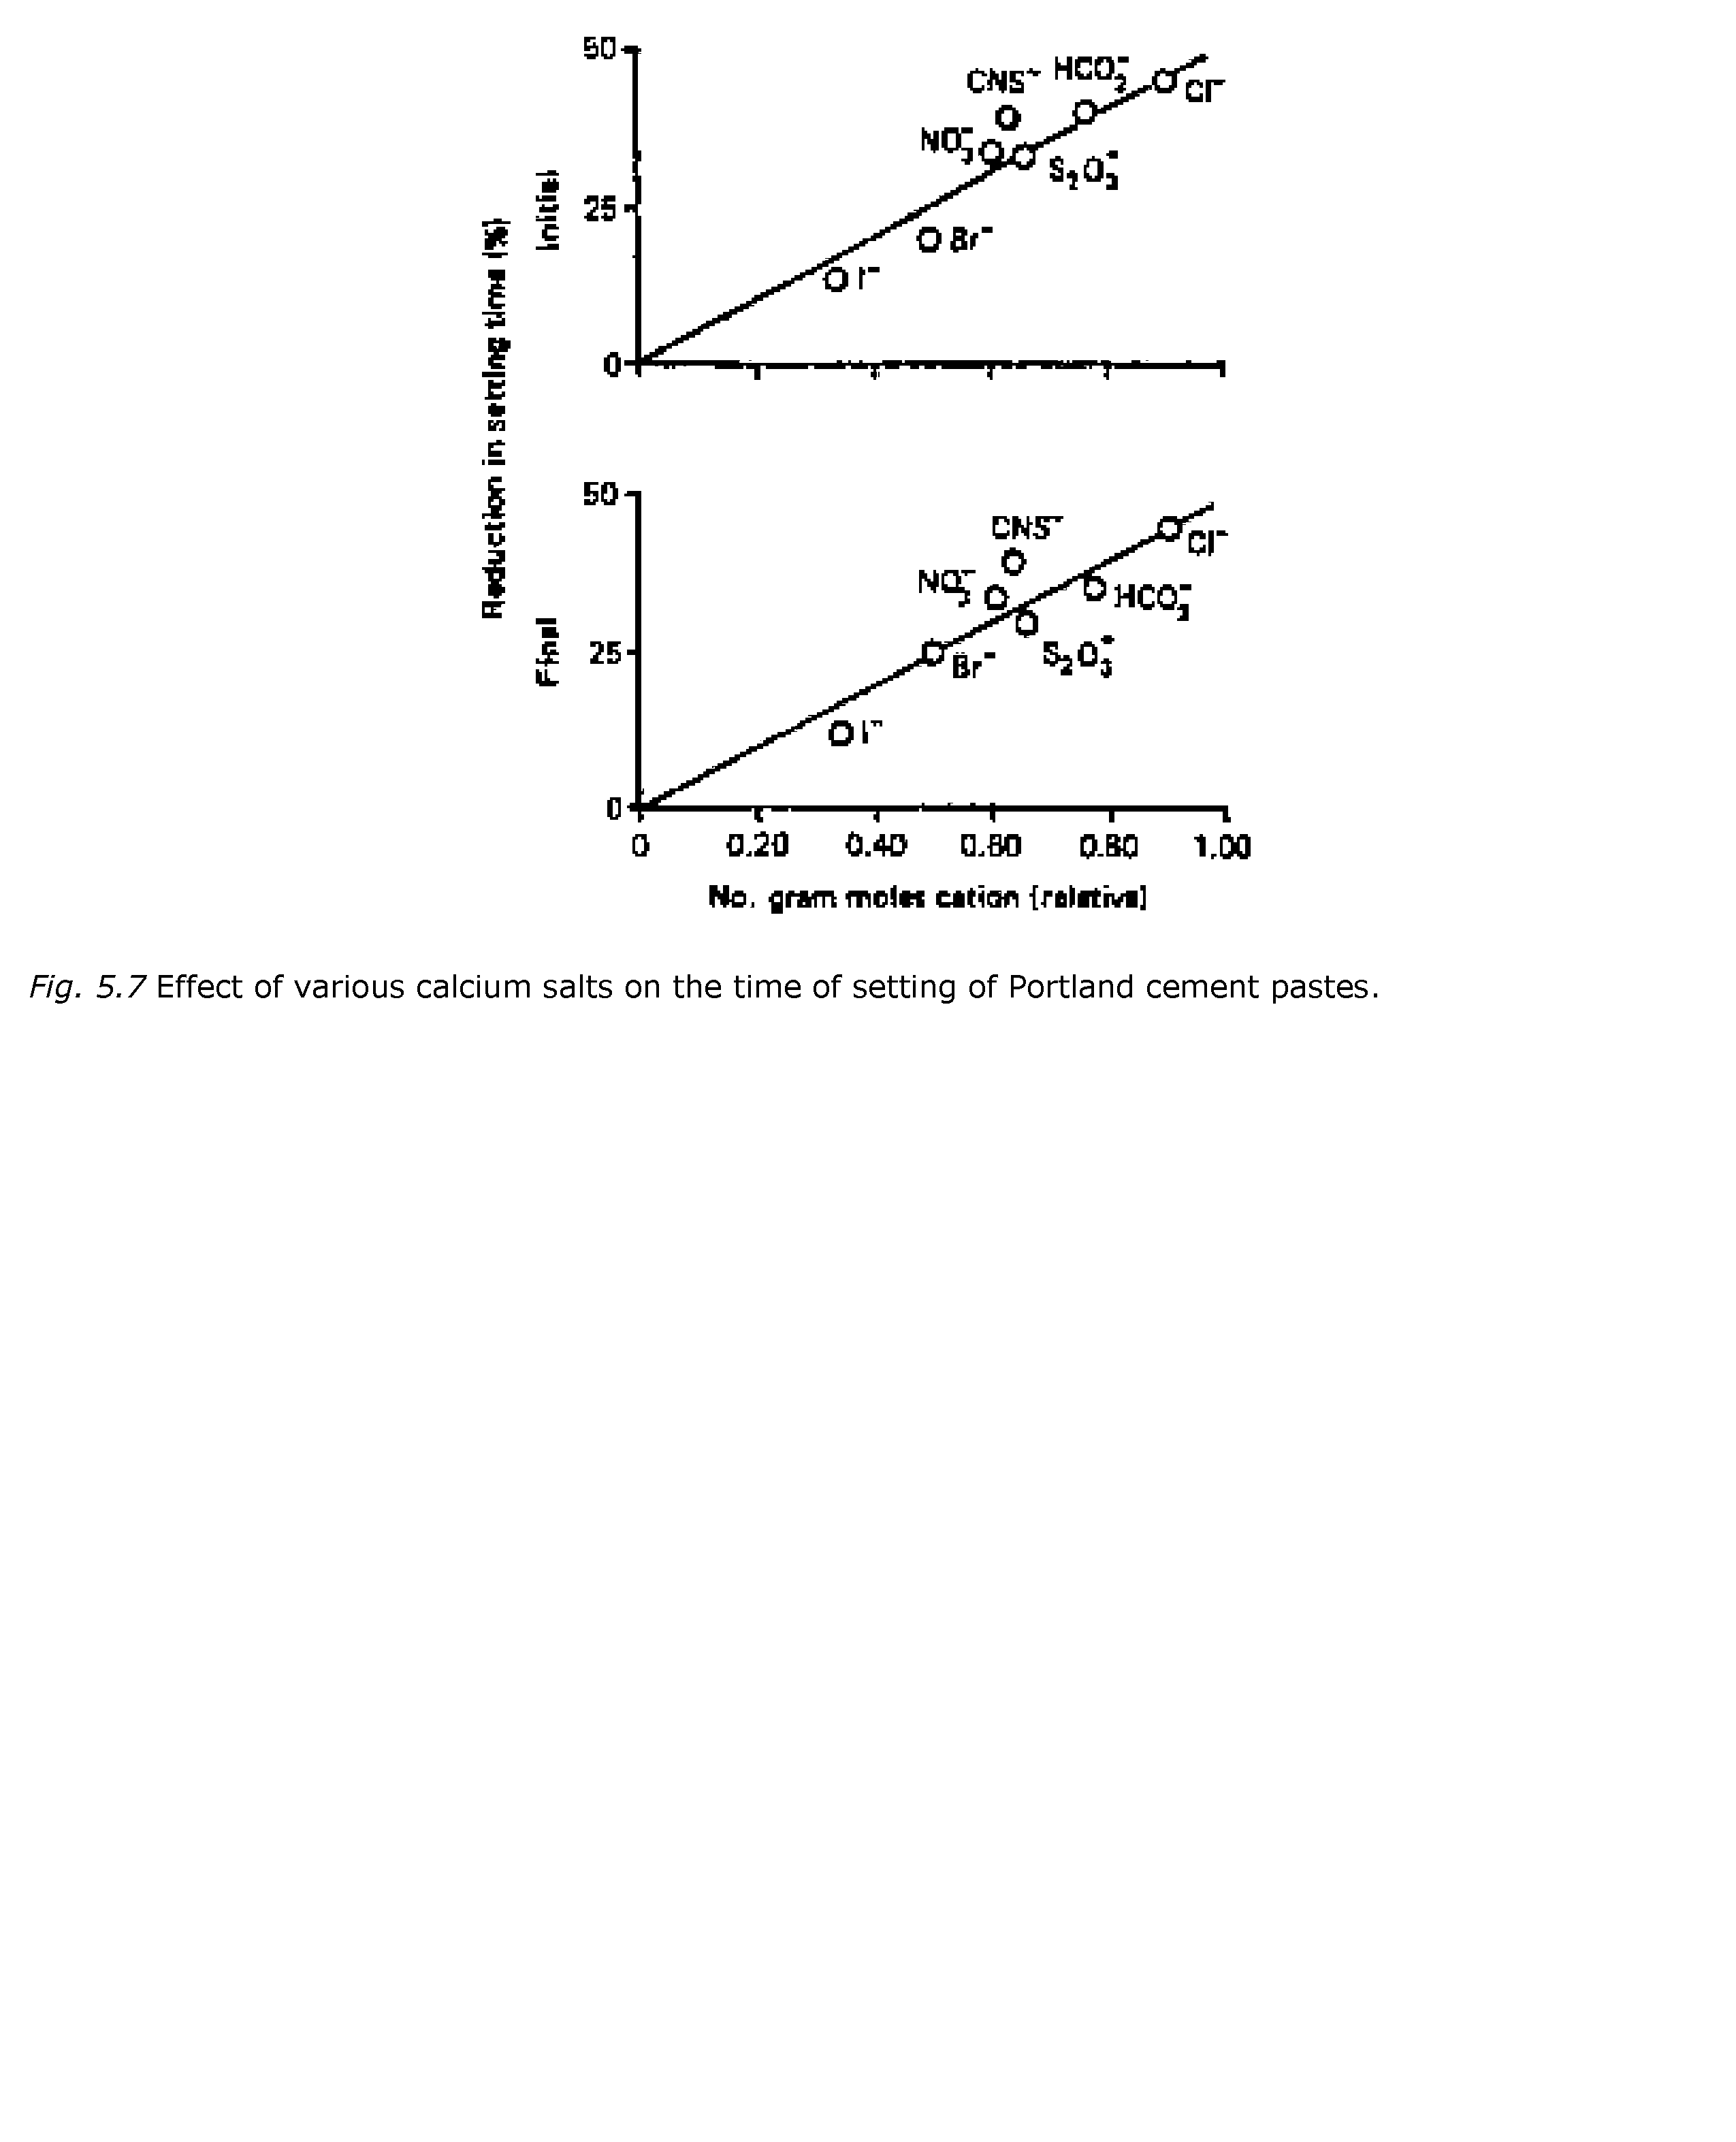 Fig. 5.7 Effect of various calcium salts on the time of setting of Portland cement pastes.